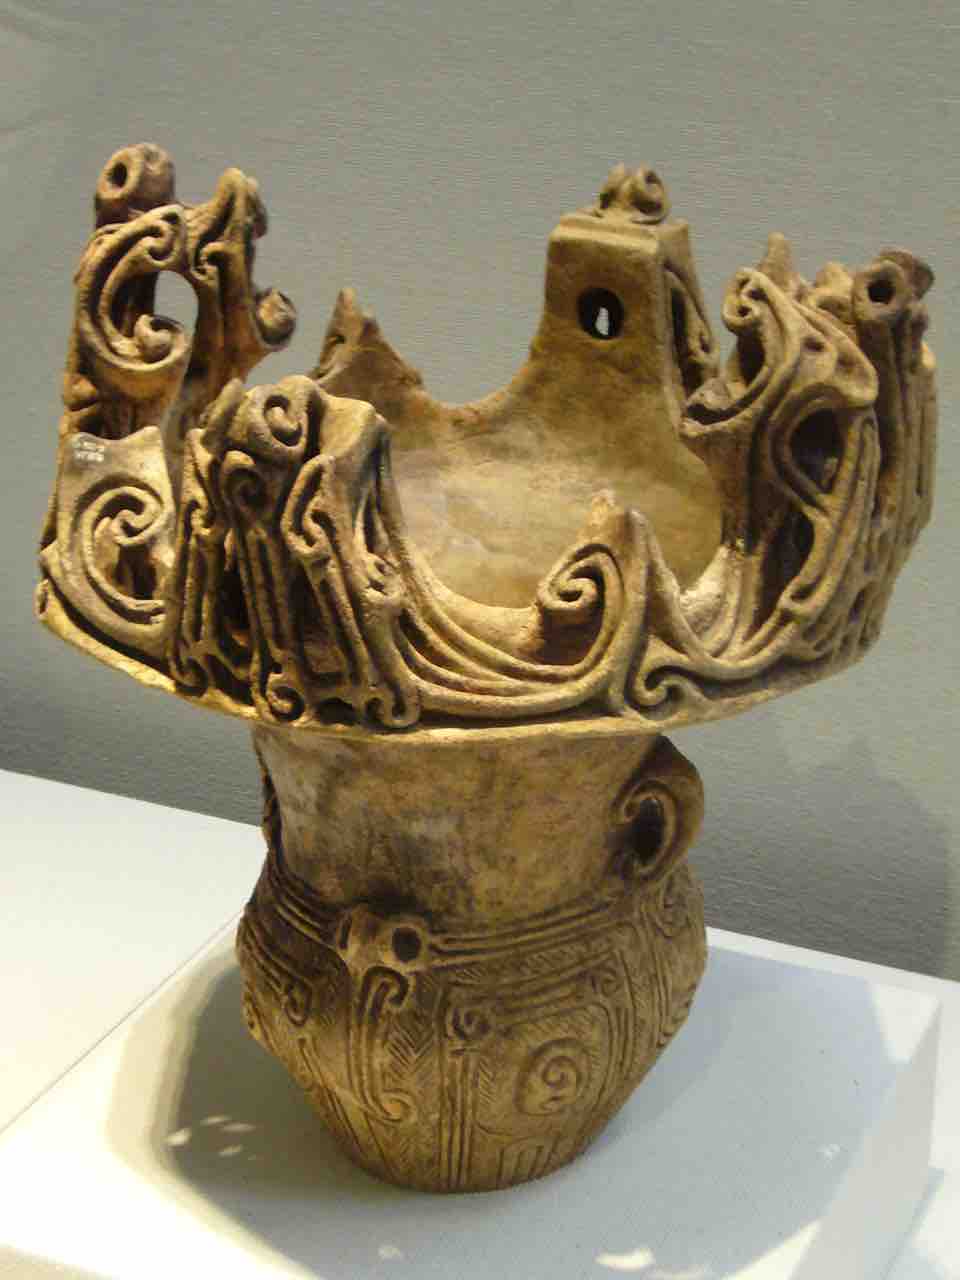 Crown-formed vessel from middle Jōmon period (3000-2000 BCE)